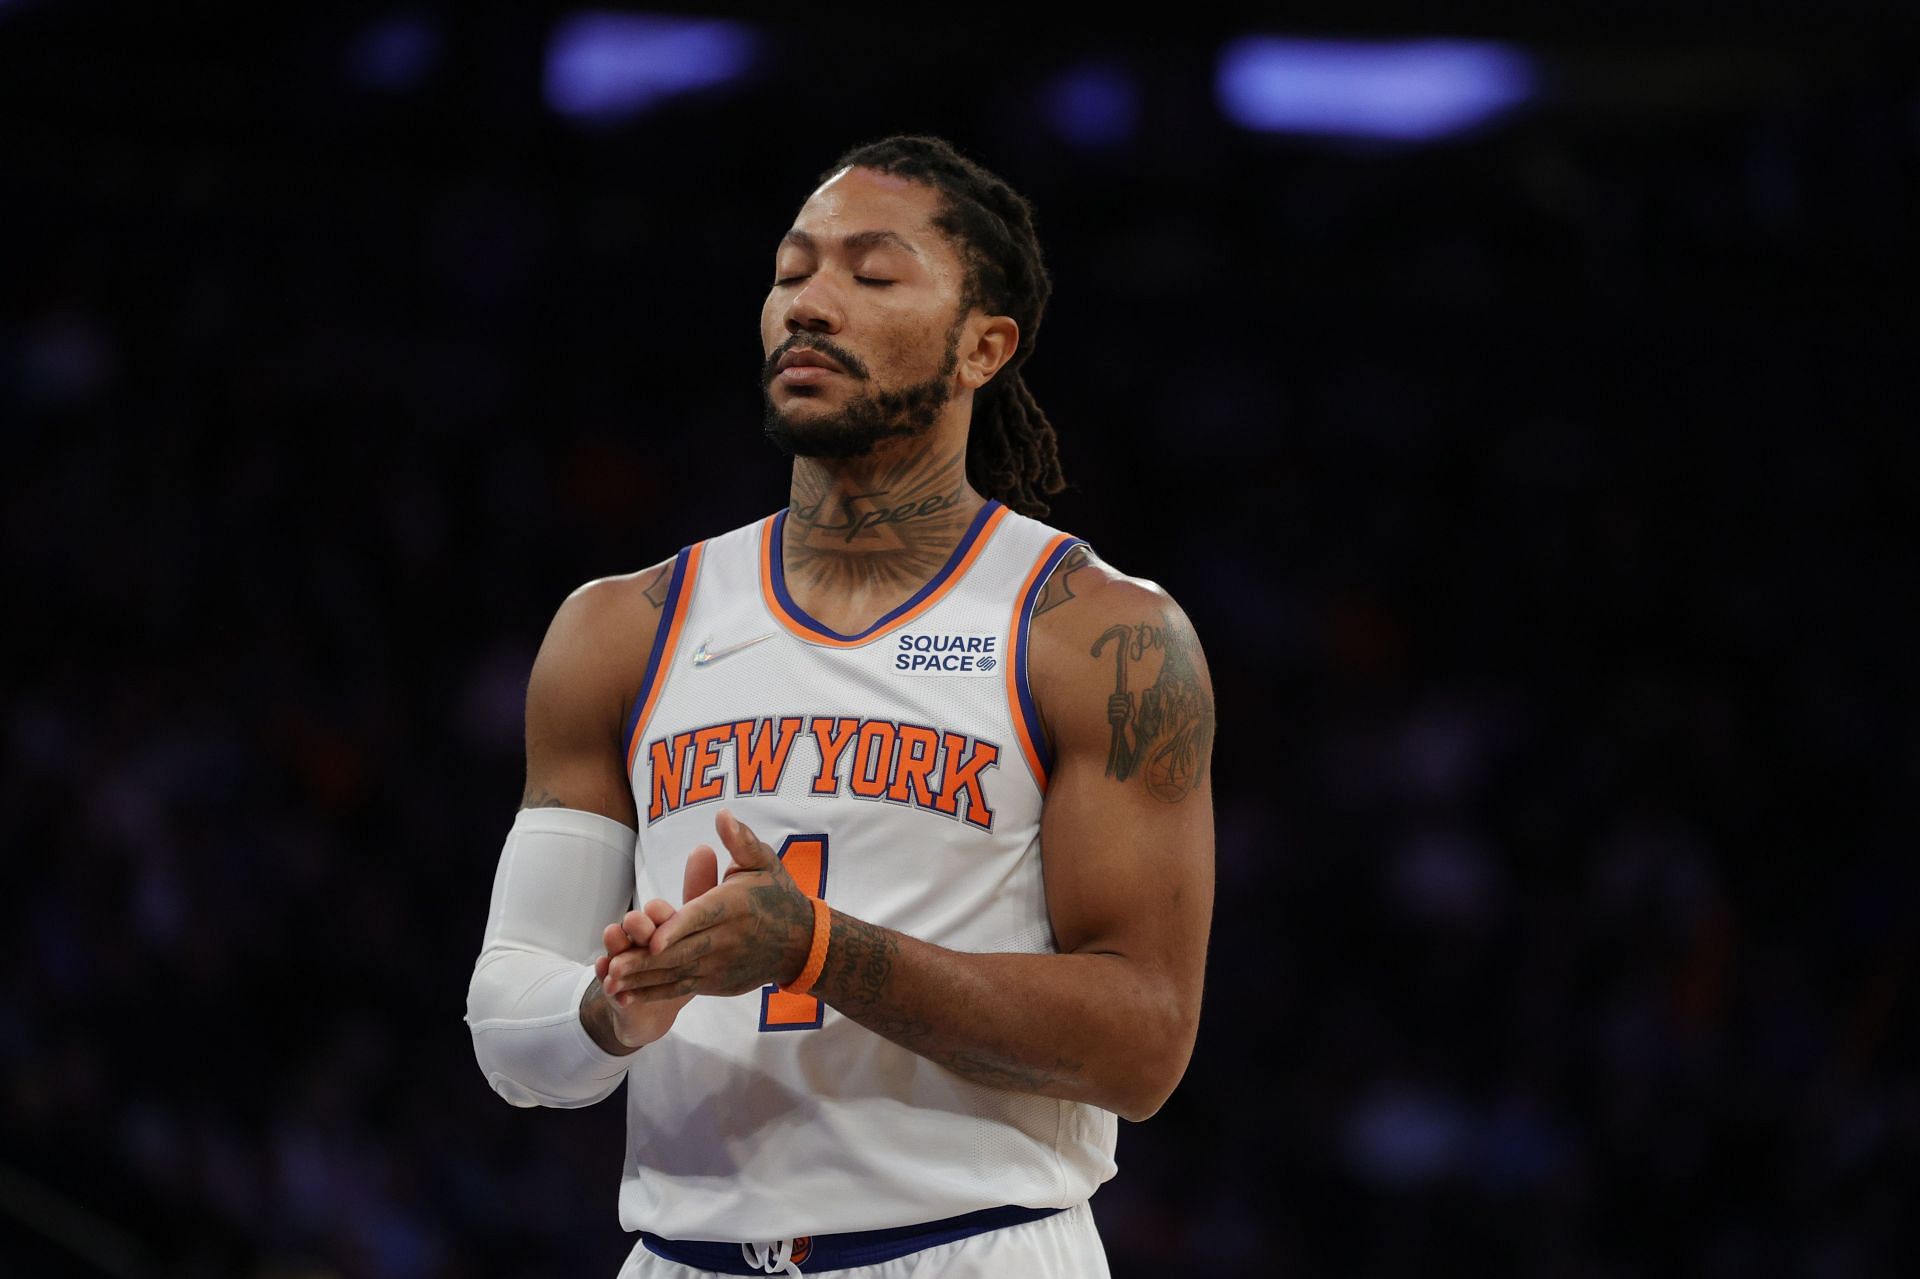 The New York Knicks will need Derrick Rose for their upcoming slate of games